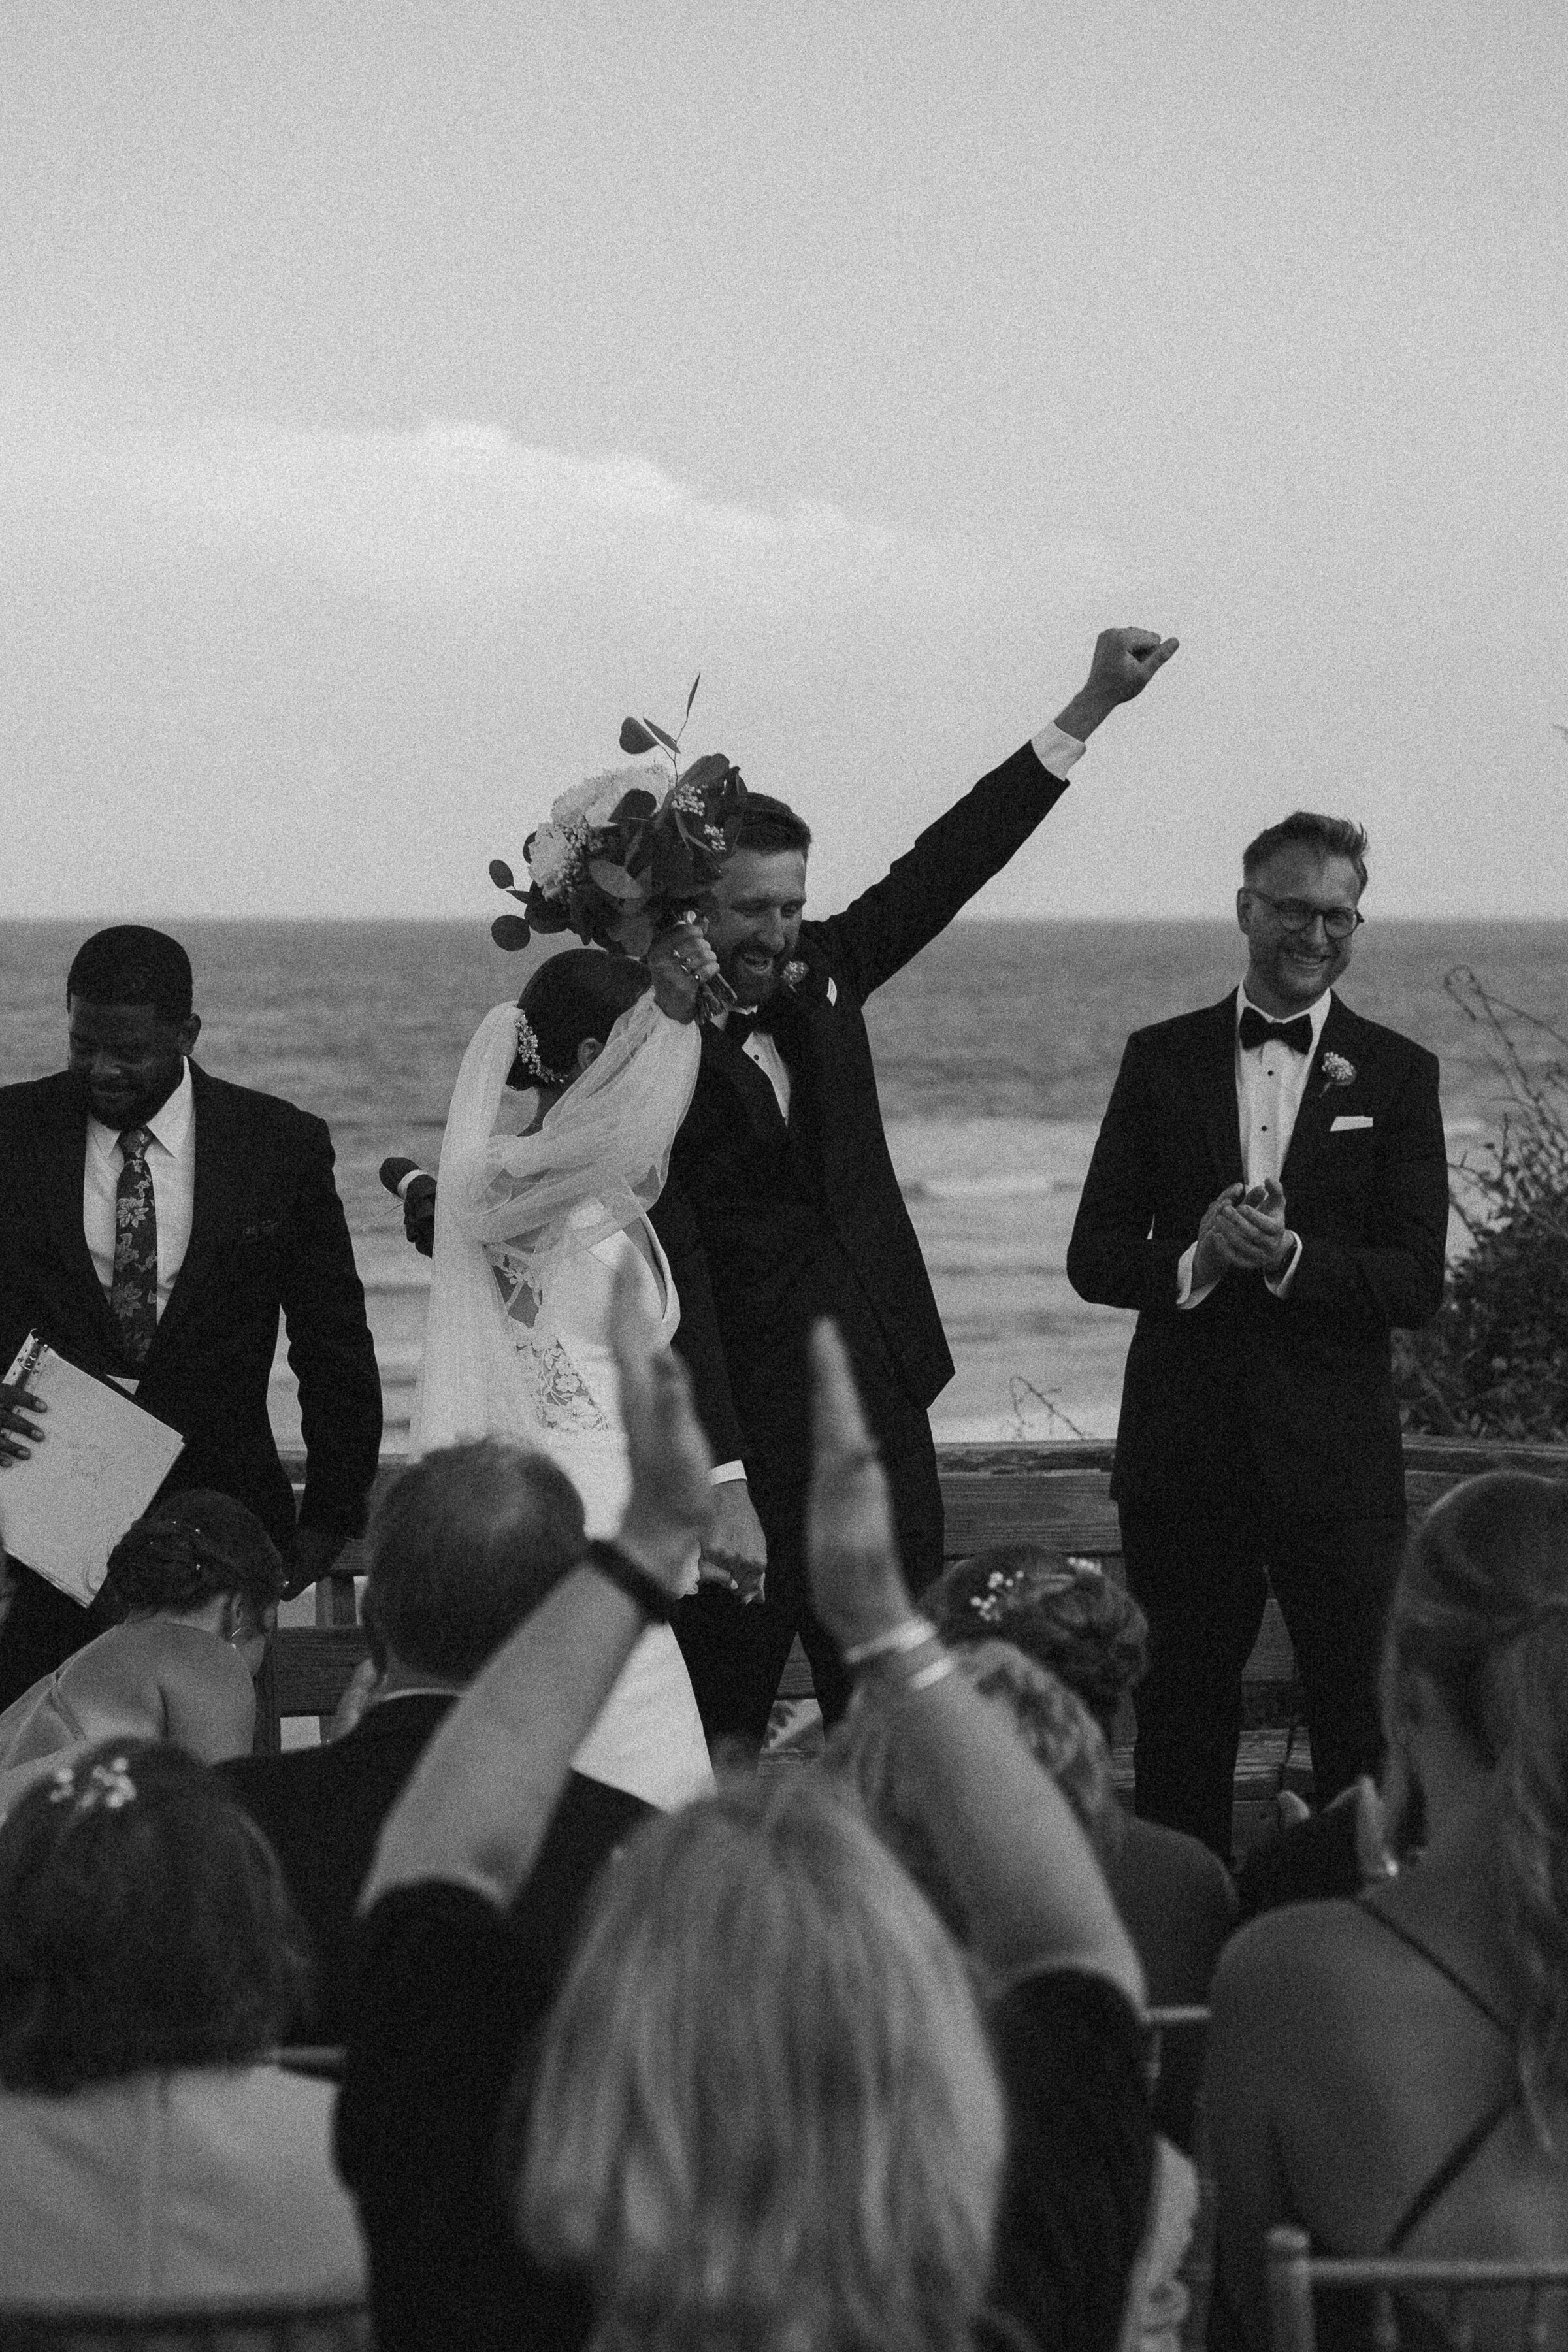 Bride and groom with raised fist, cheered by guests